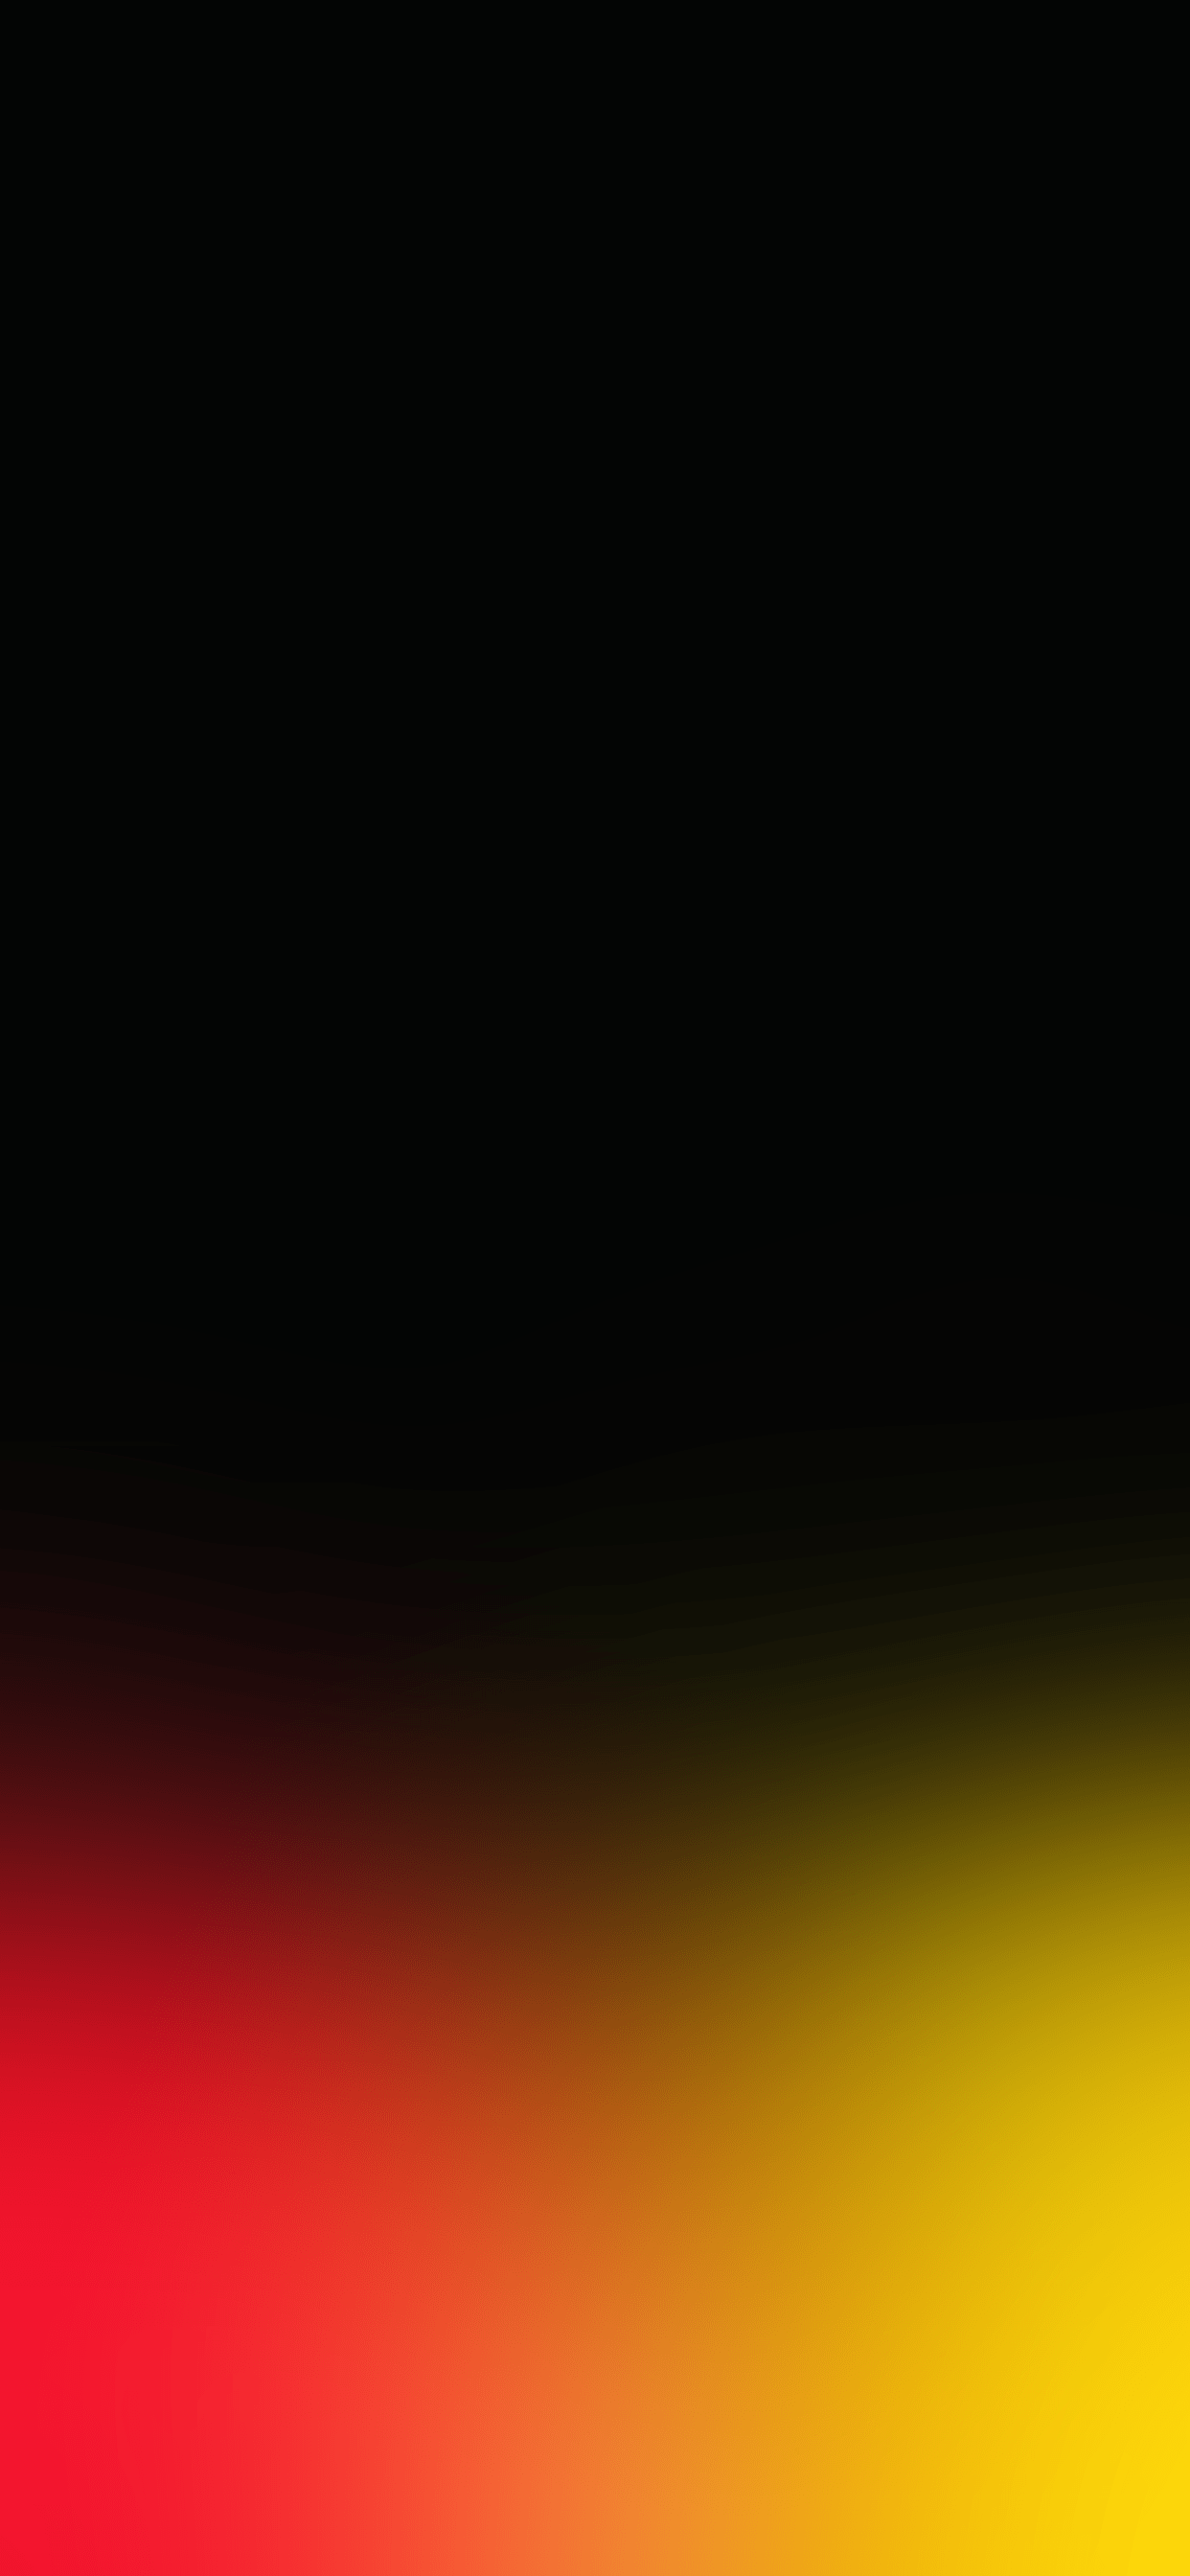 Gradient Colors Wallpaper for iPhone X, 6